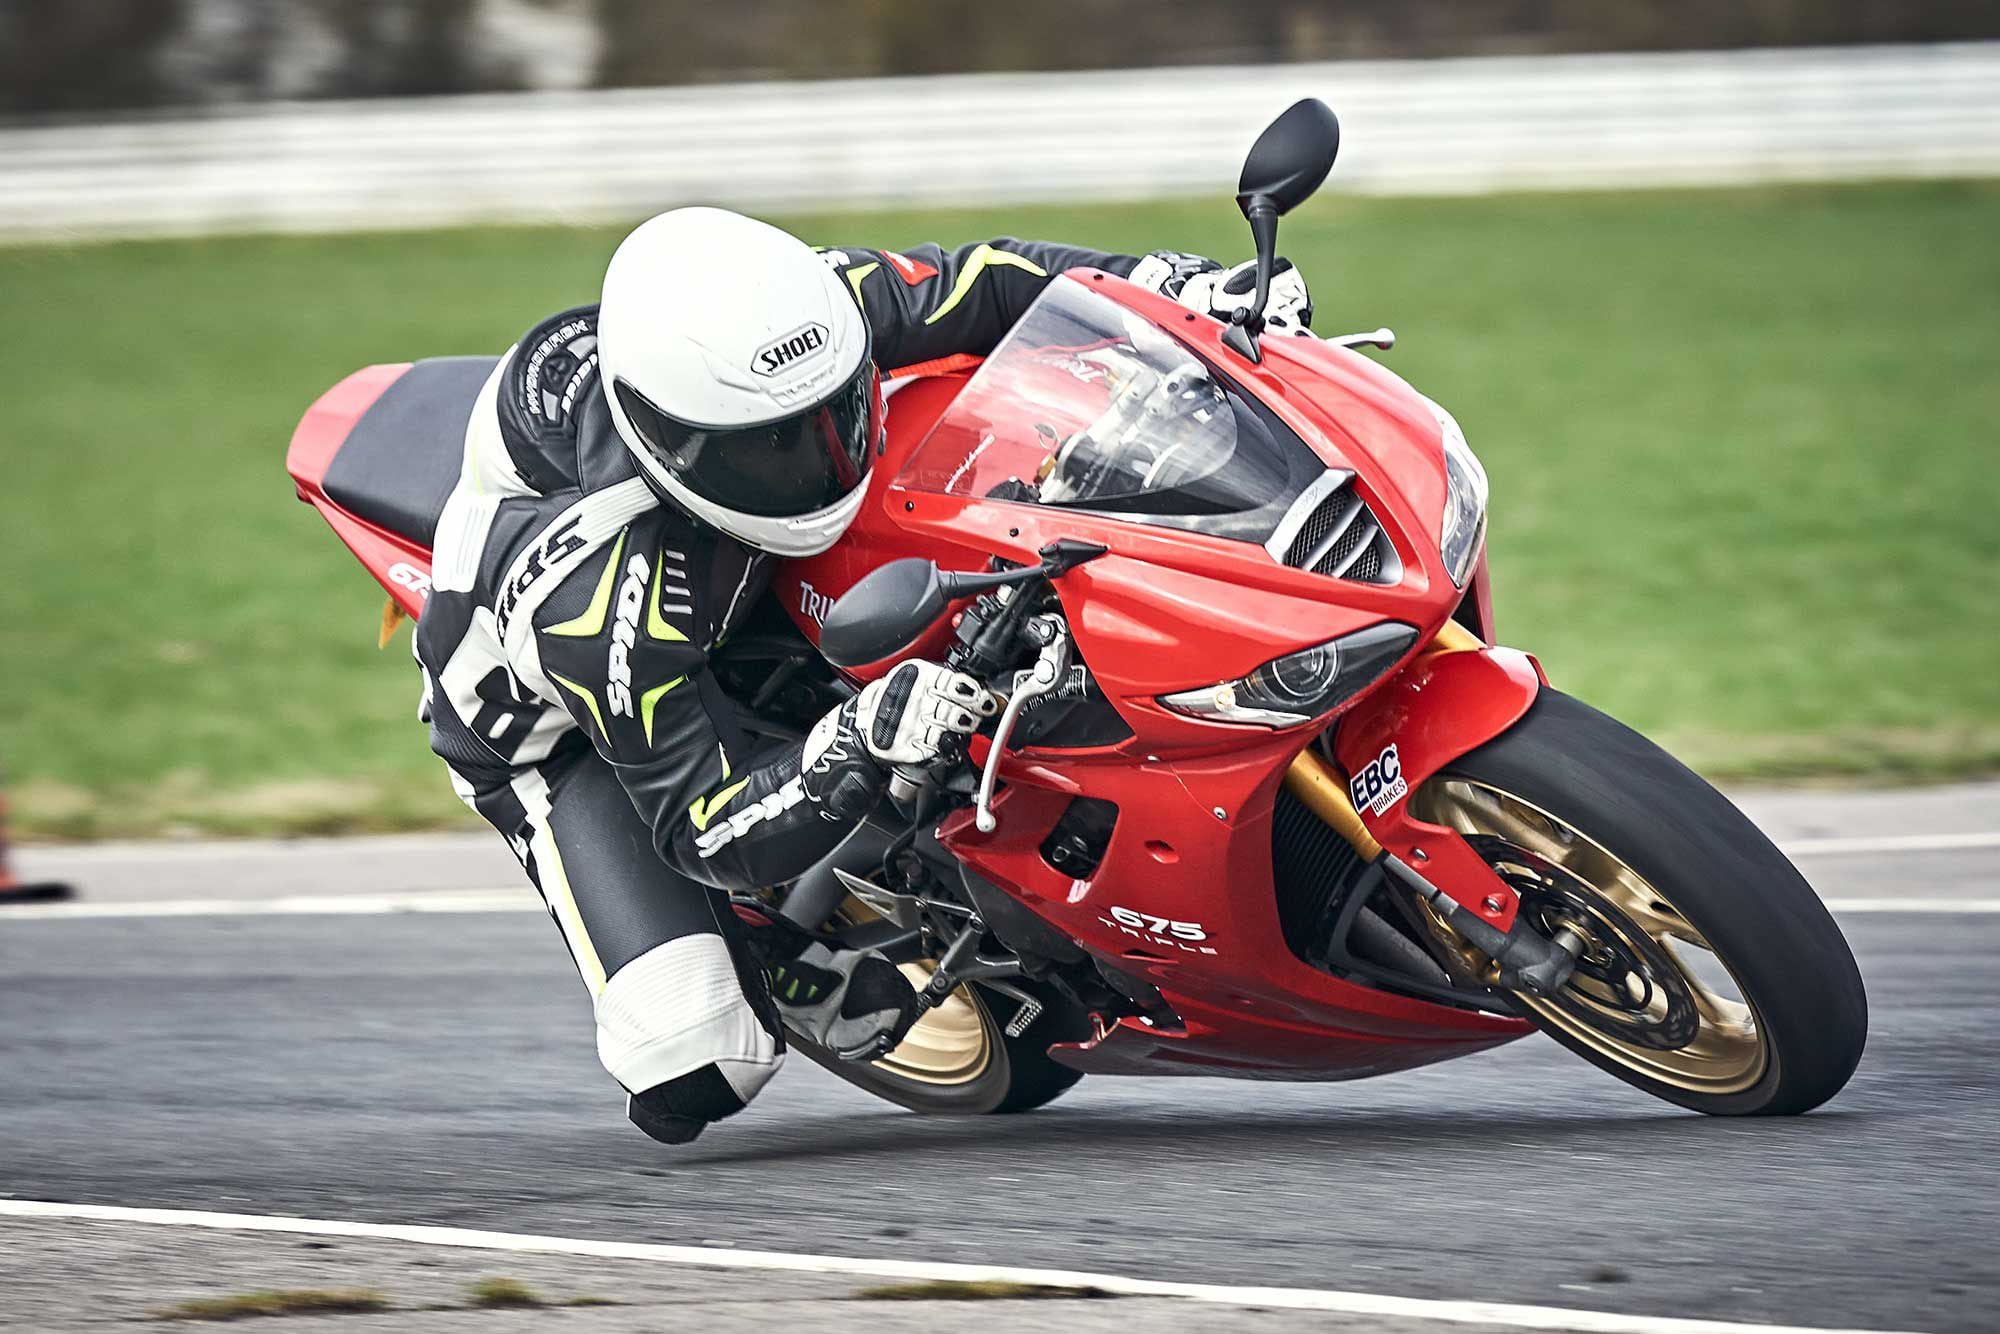 The rider connection to the Daytona 675’s throttle and brakes is raw and direct.